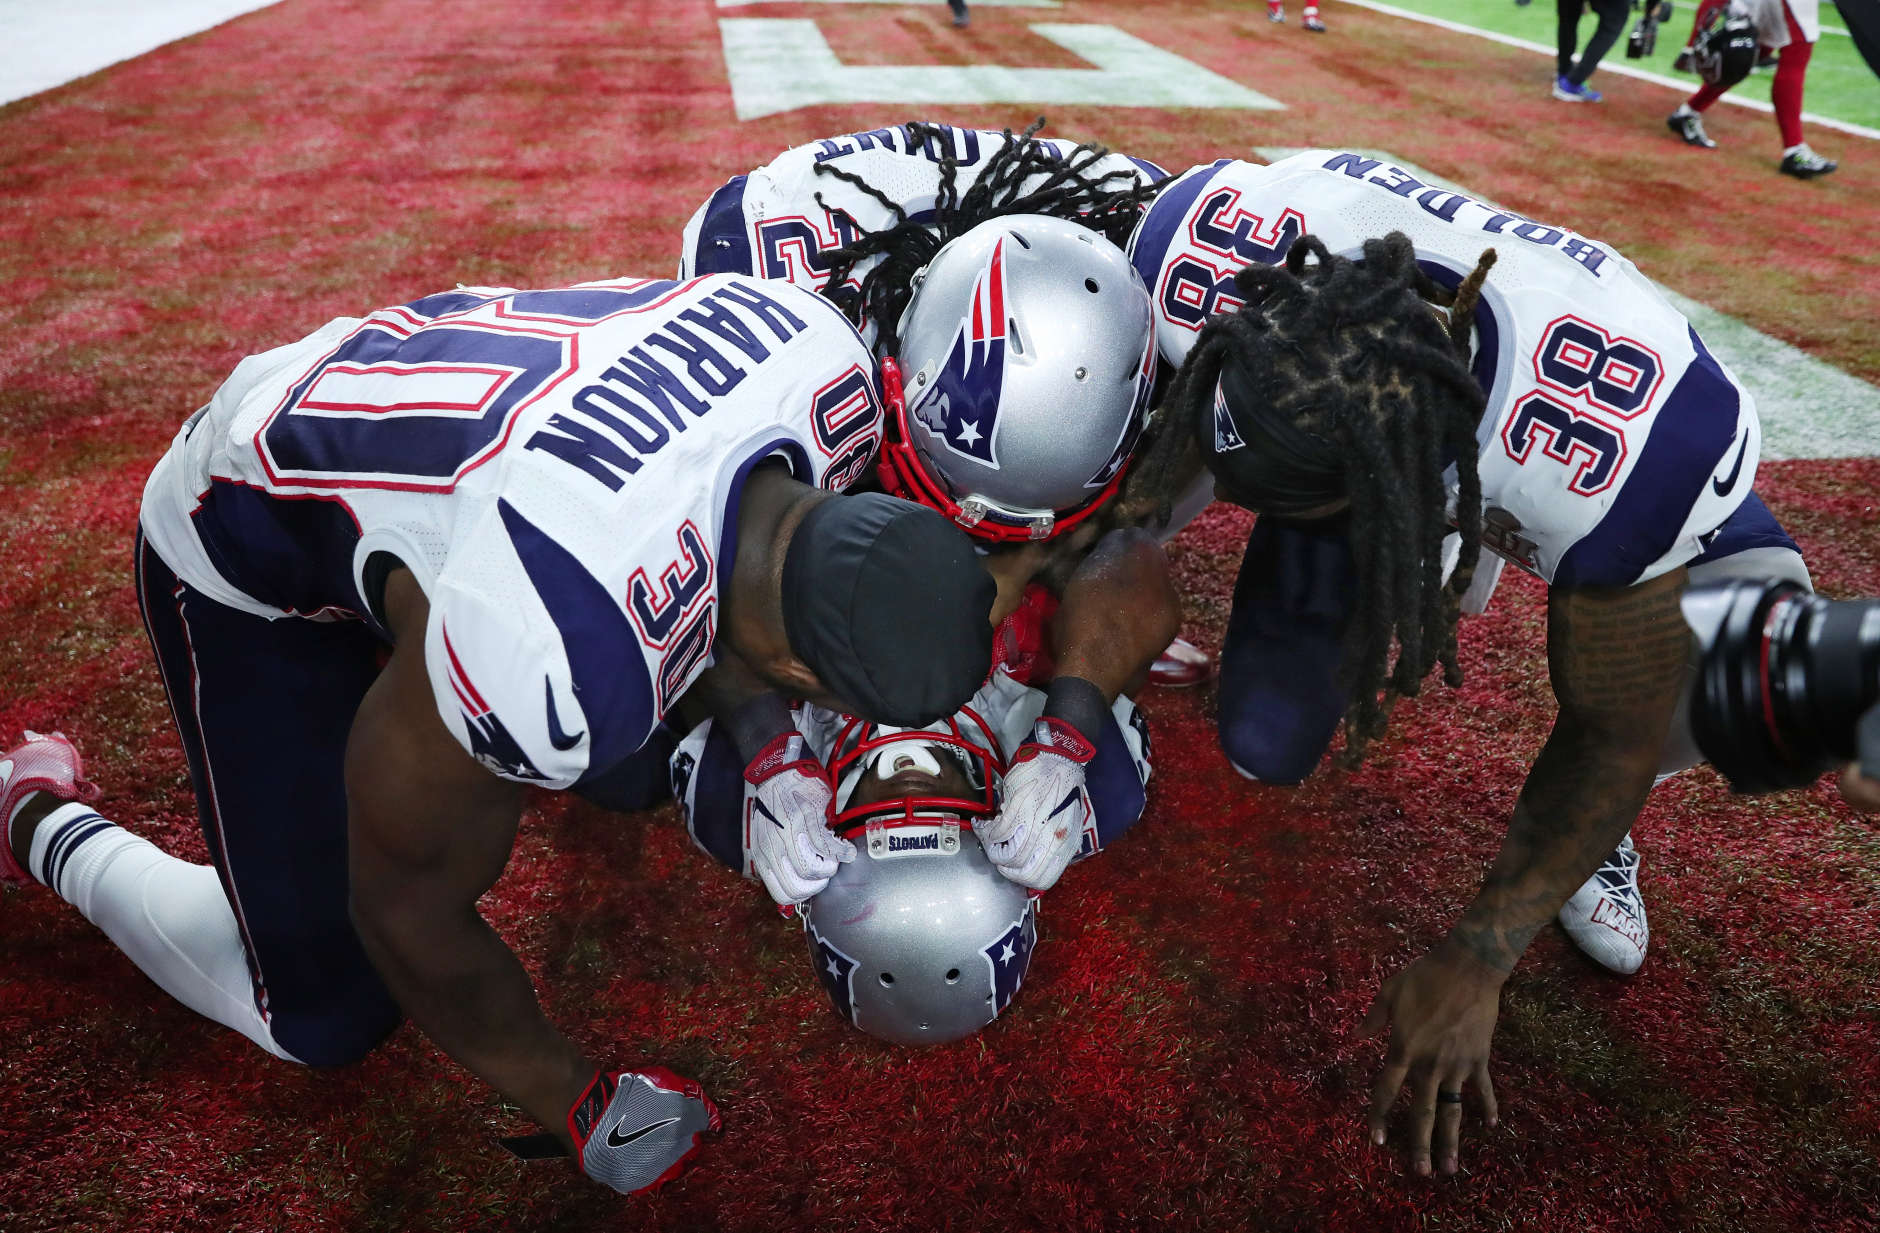 HOUSTON, TX - FEBRUARY 05:  James White #28 of the New England Patriots celebrates with teammates after defeating the Atlanta Falcons 34-28 in overtime to win Super Bowl 51 at NRG Stadium on February 5, 2017 in Houston, Texas.  (Photo by Tom Pennington/Getty Images)